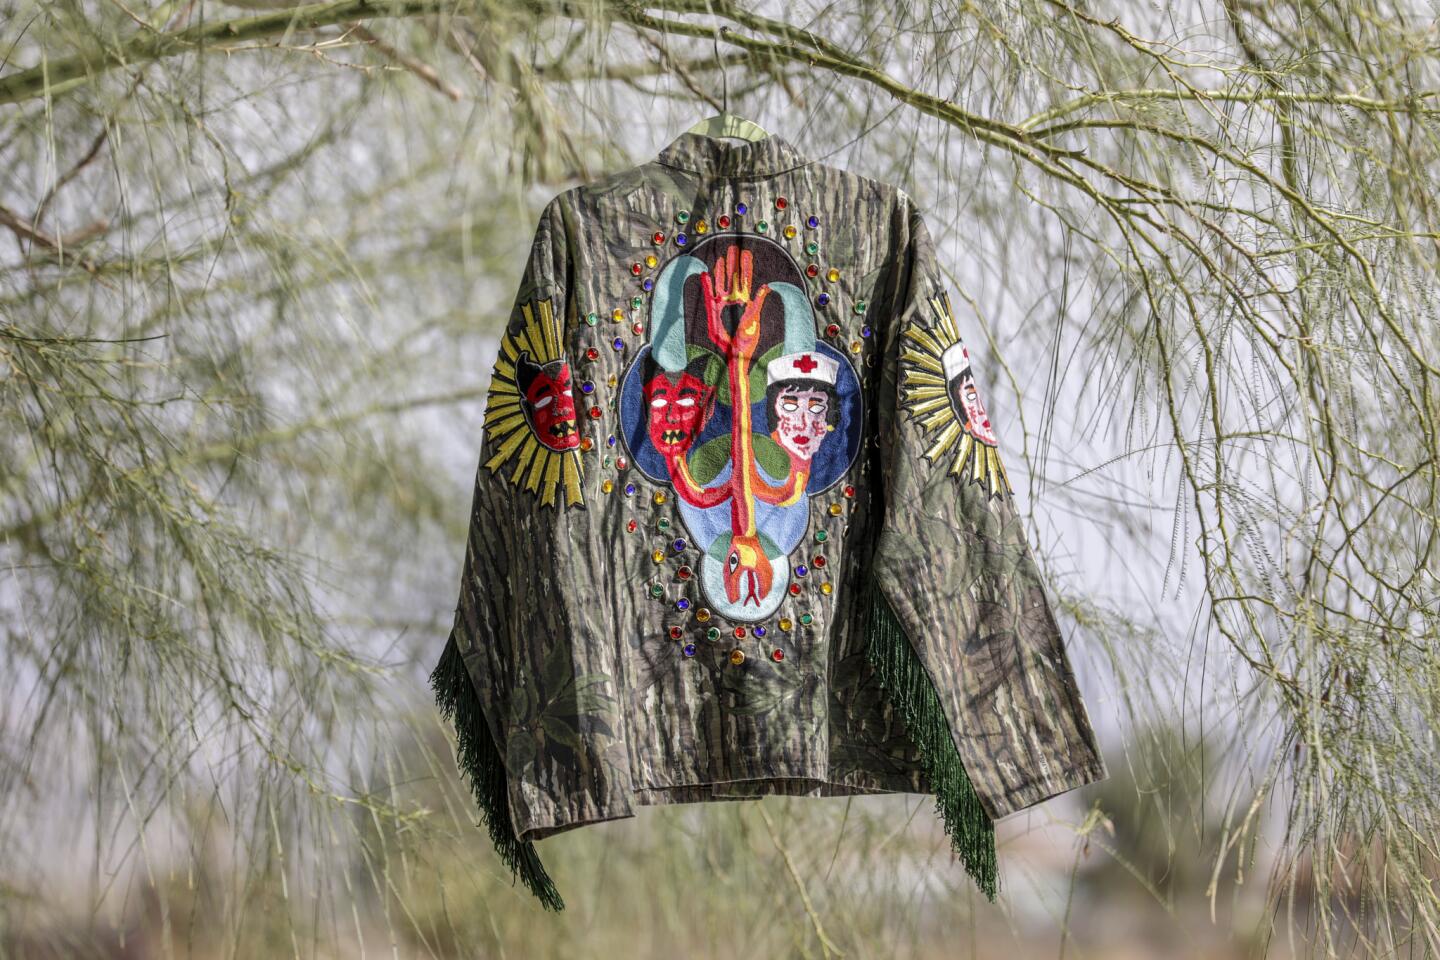 The art jacket “Healer and the Trickster” created by Svetlana Shigroff consists of new, vintage and original chain stitch patches made from tapestries she created.